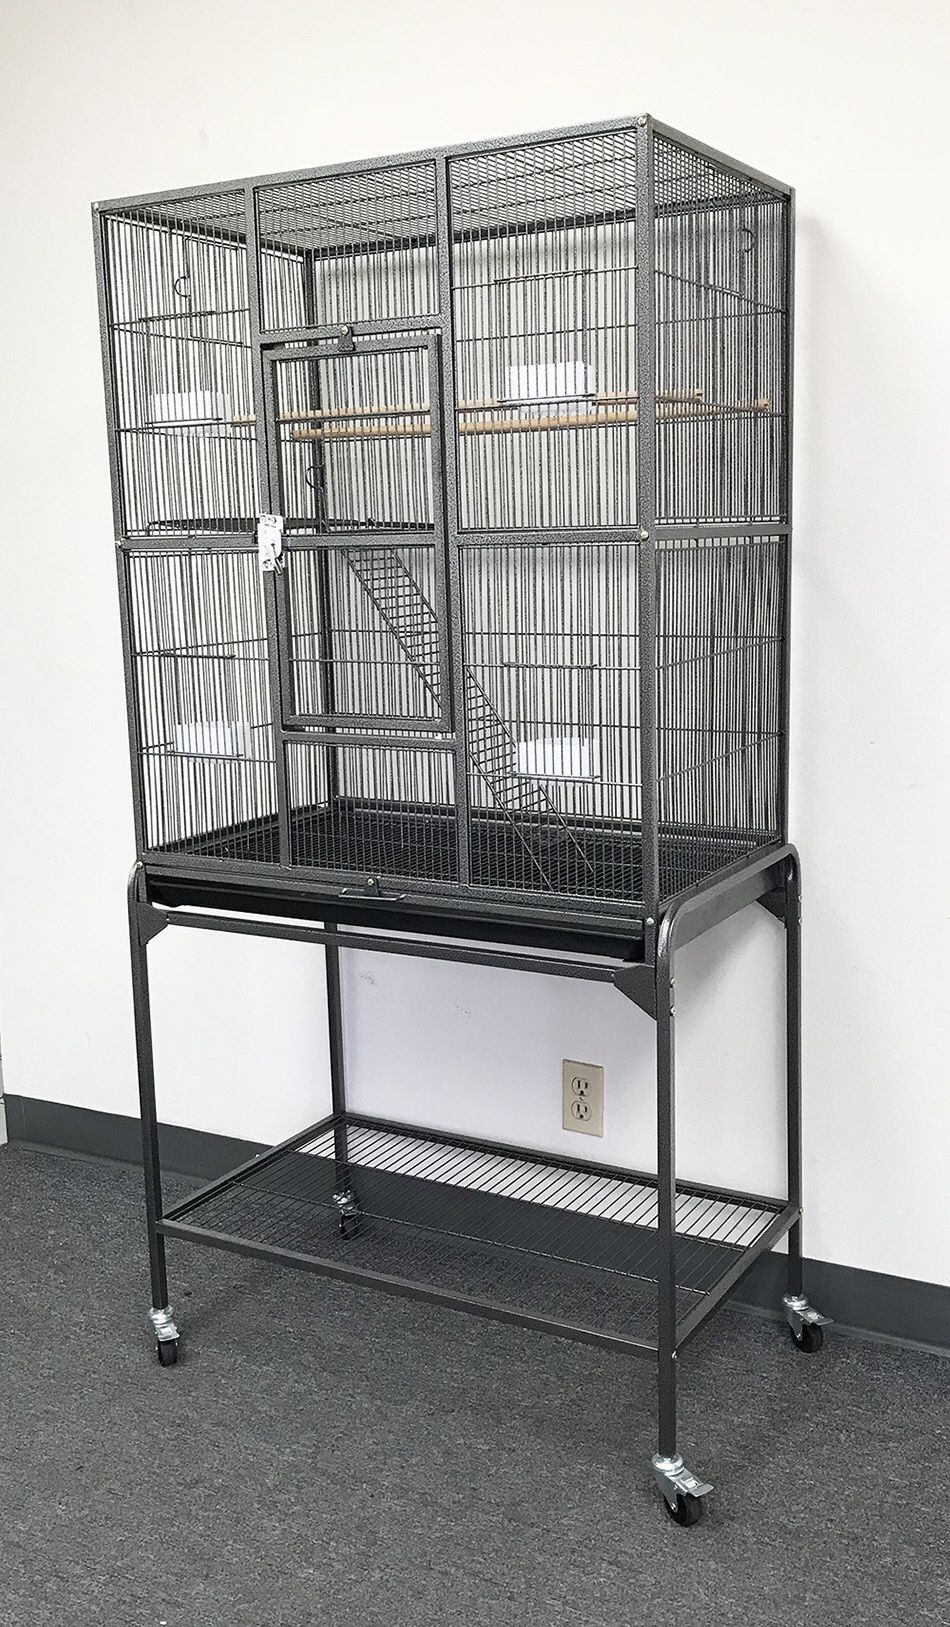 $90 NEW Large Bird Cage Parrot Ferret Cockatiel House Gym Perch Stand w/ Wheels 32”x18”x63”